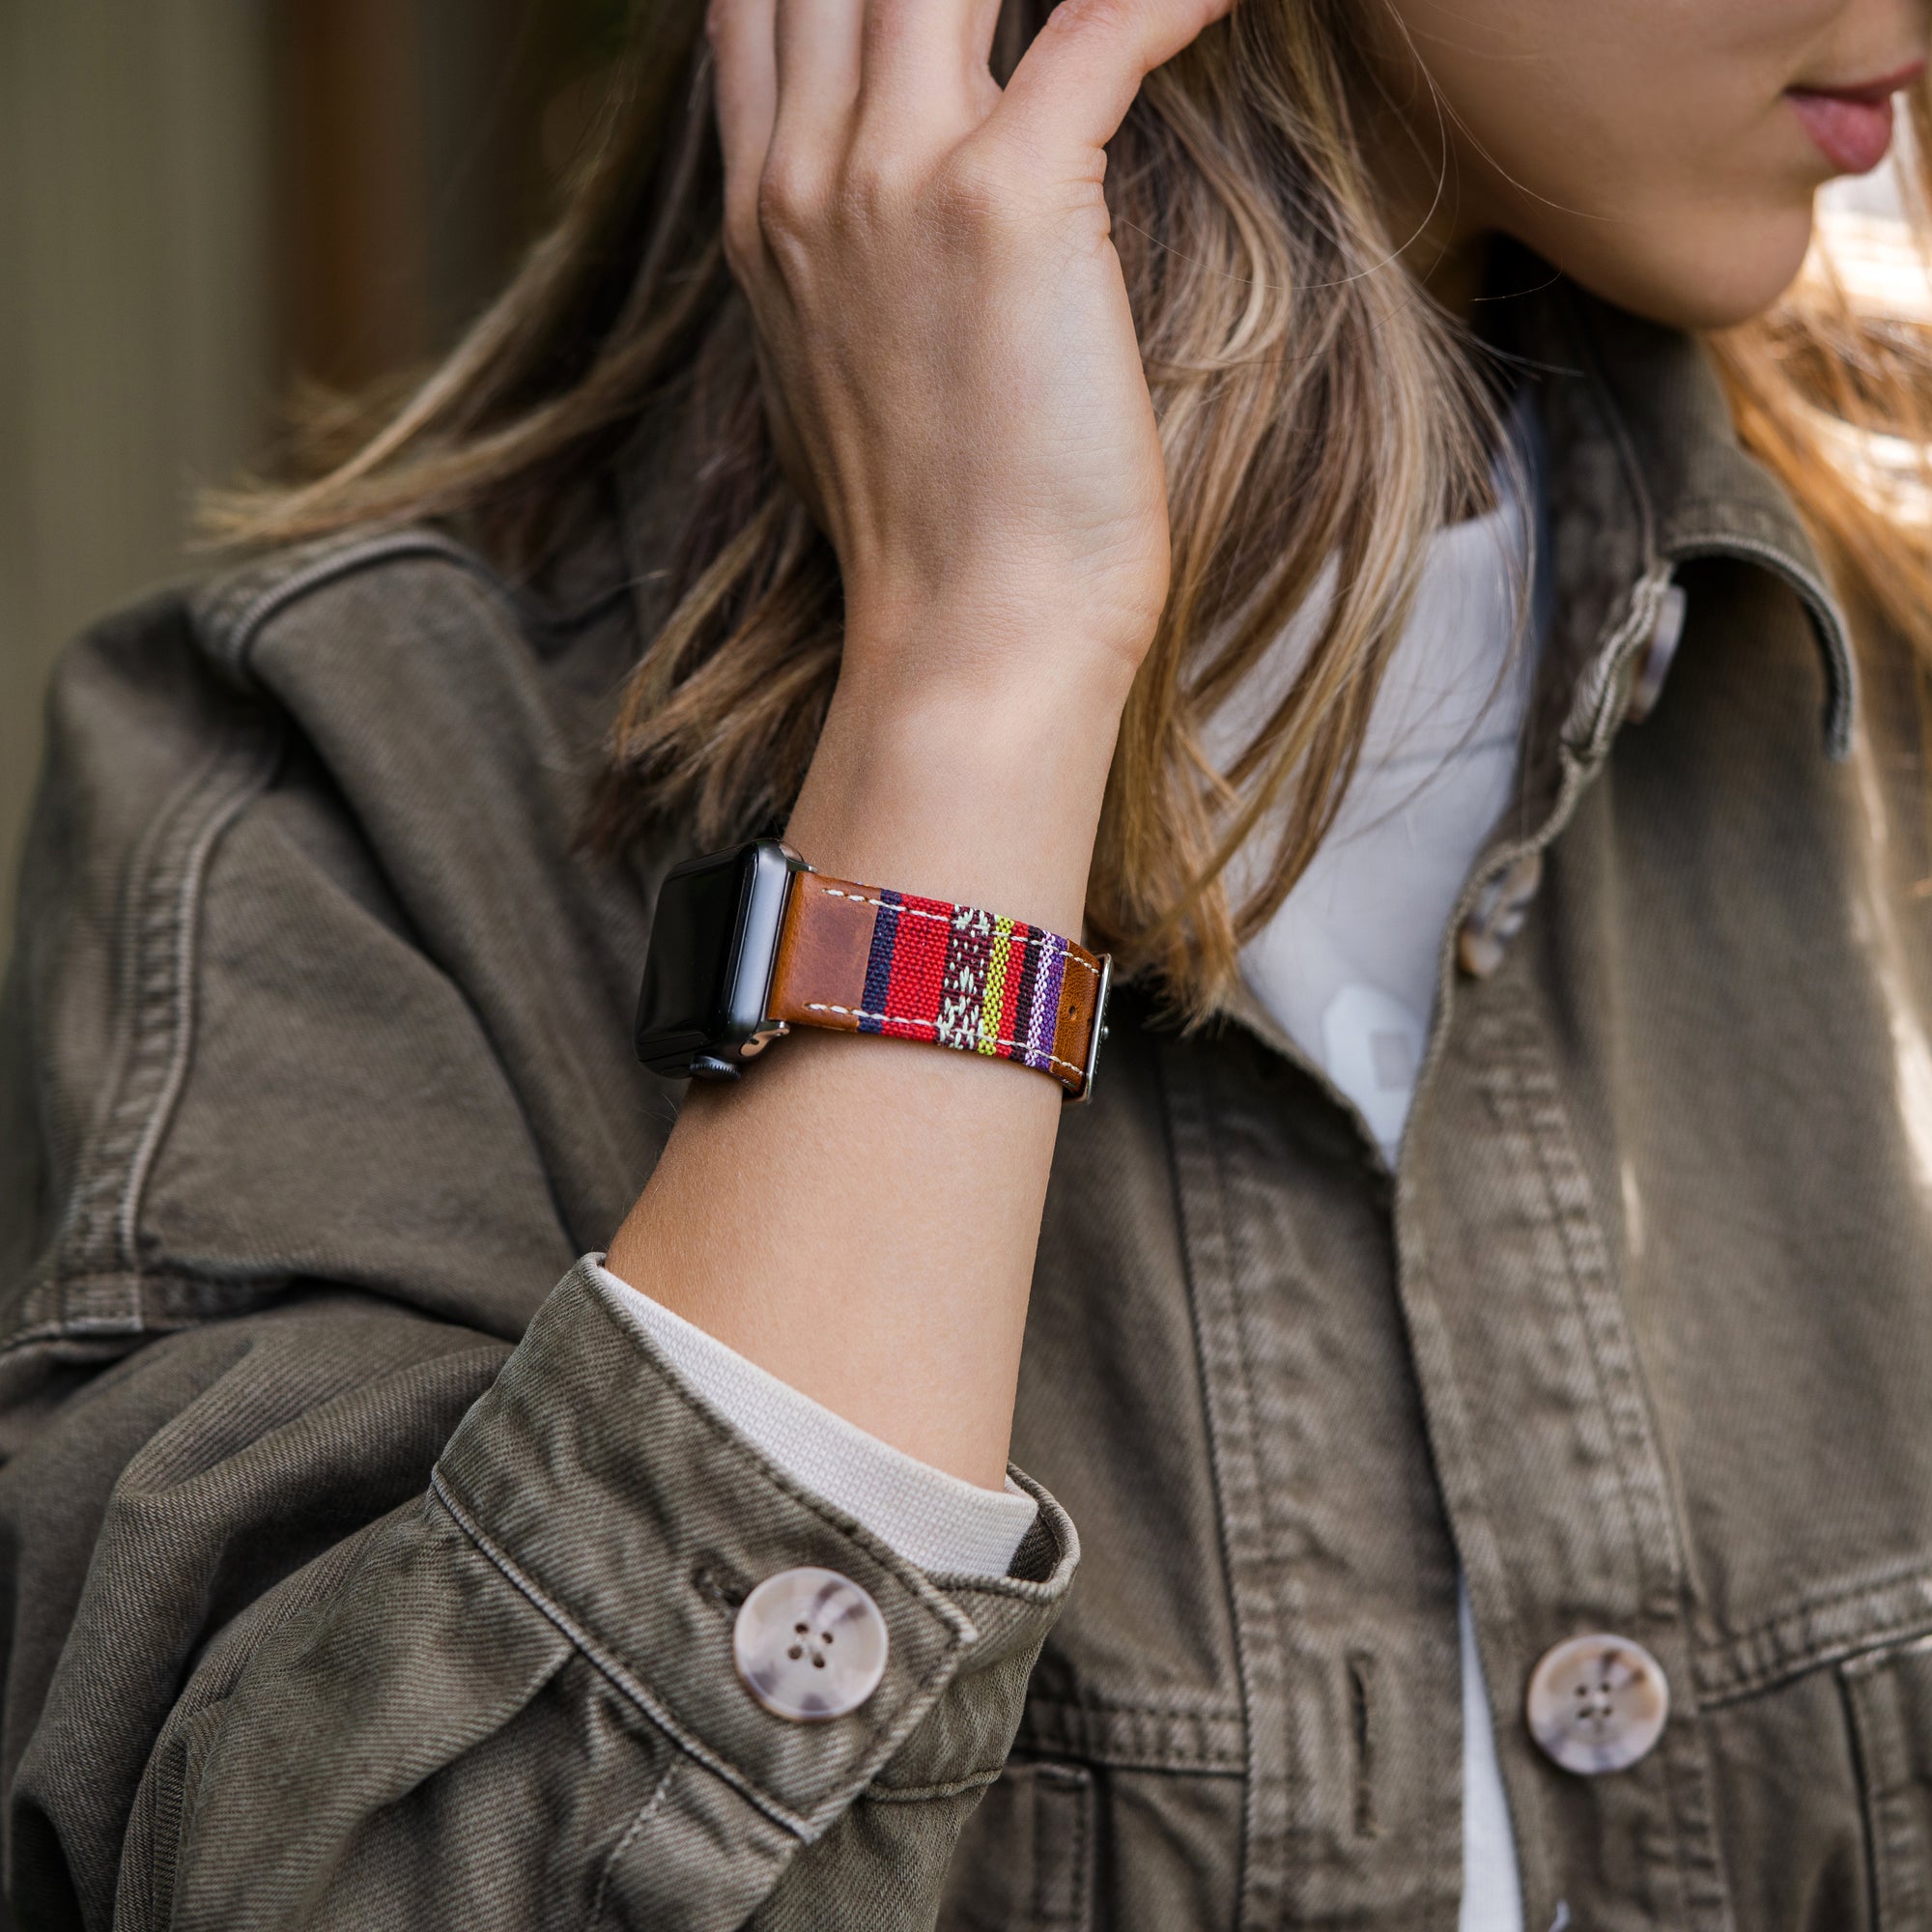 Explore the World With Our New Nomad Apple Watch Band